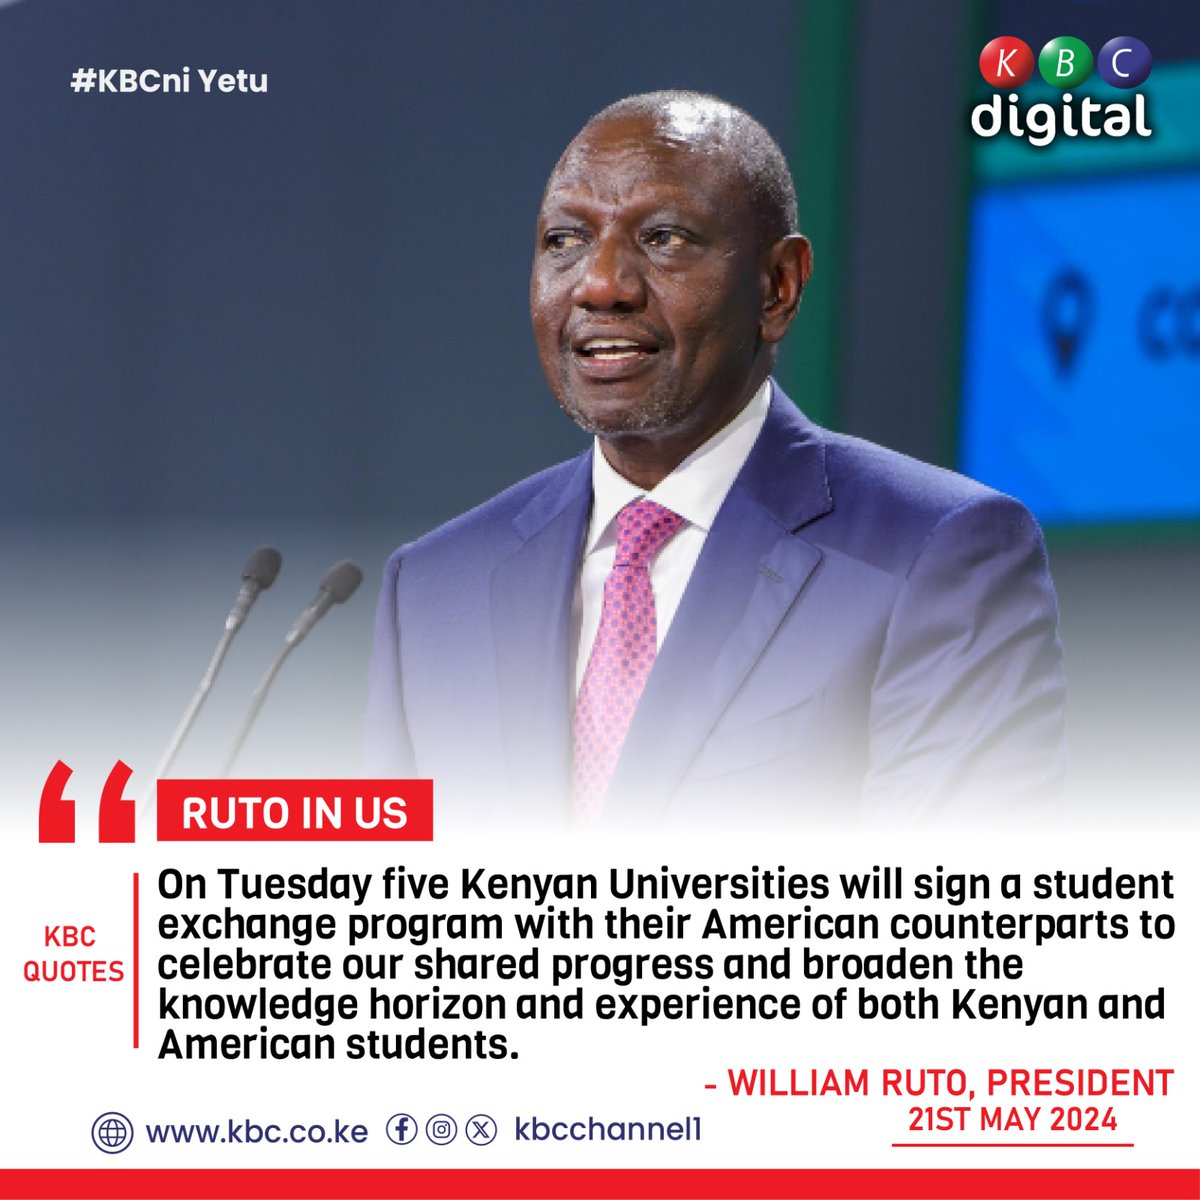 'On Tuesday five Kenyan Universities will sign a student exchange program with their American counterparts to celebrate our shared progress and broaden the knowledge horizon and experience of both Kenyan and American students.' President William Ruto #KBCniYetu ^RO